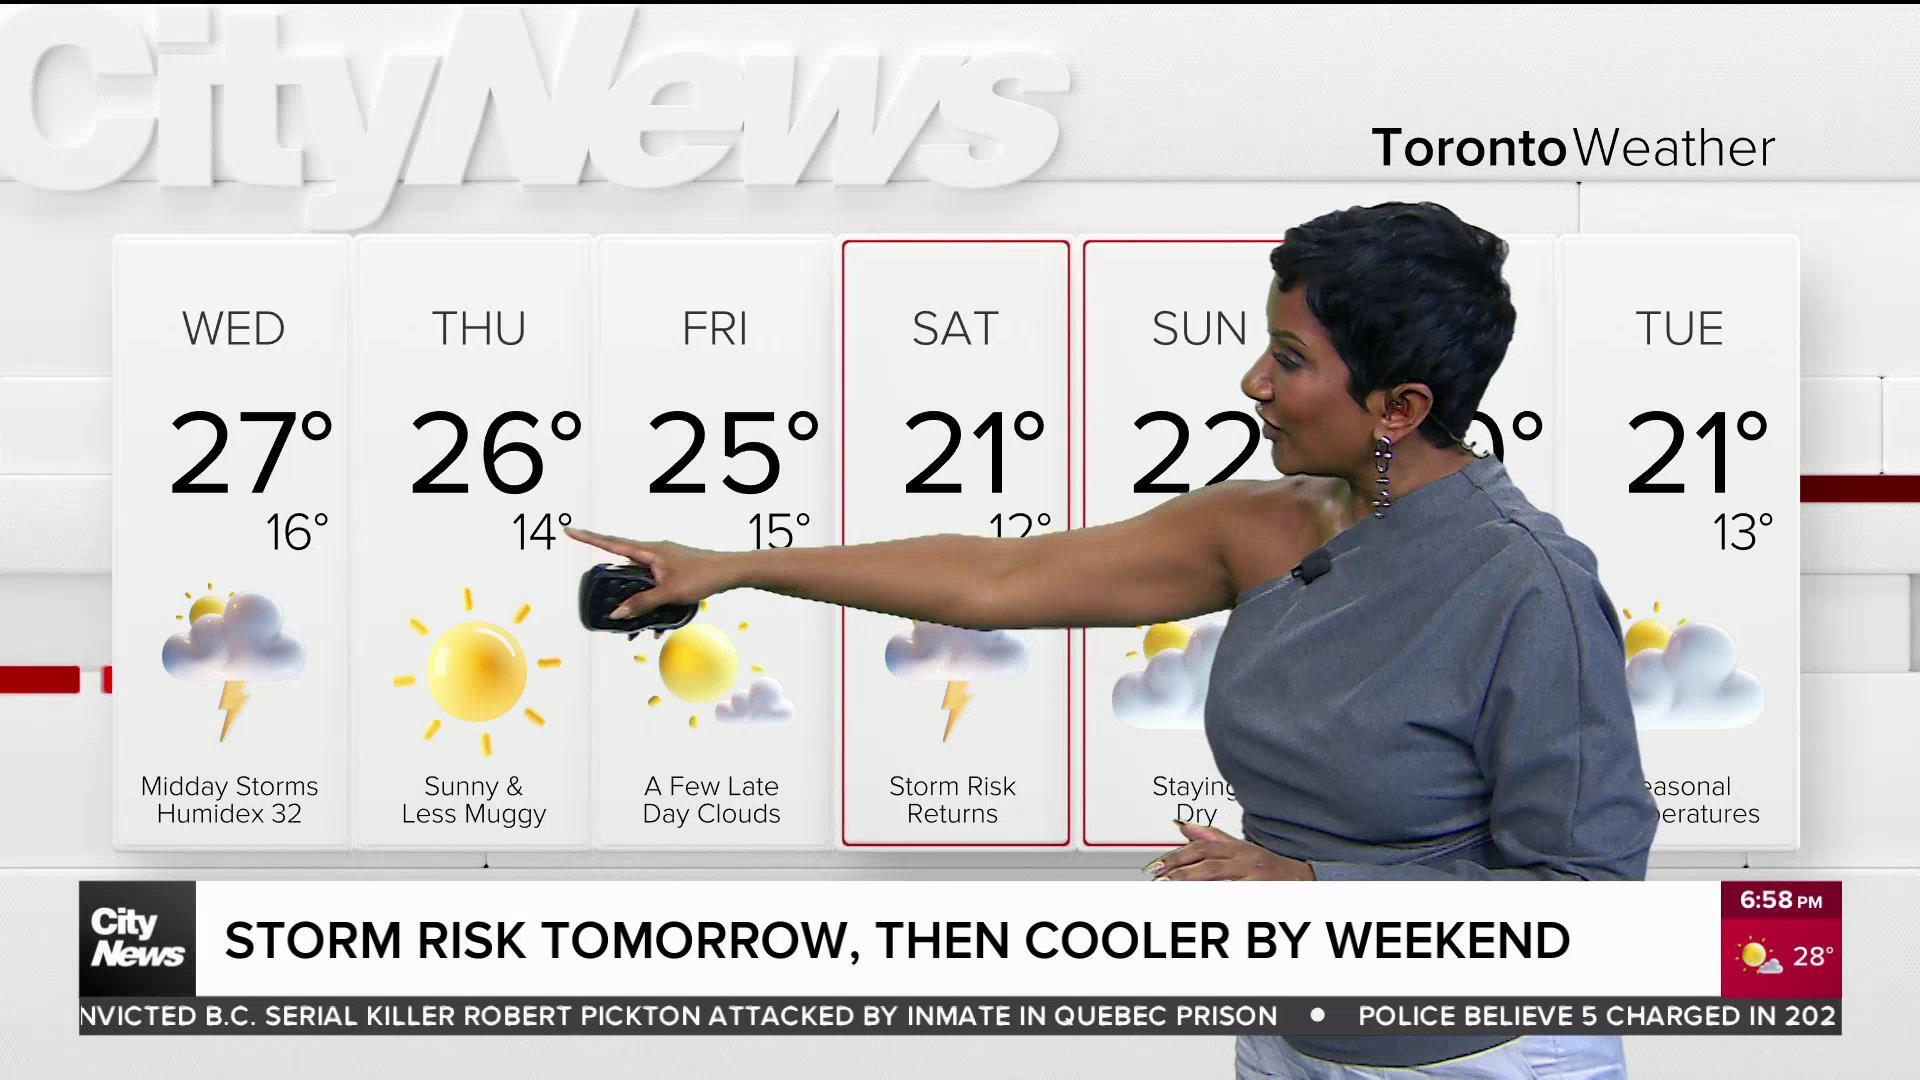 Storm risk tomorrow, then cooler by weekend